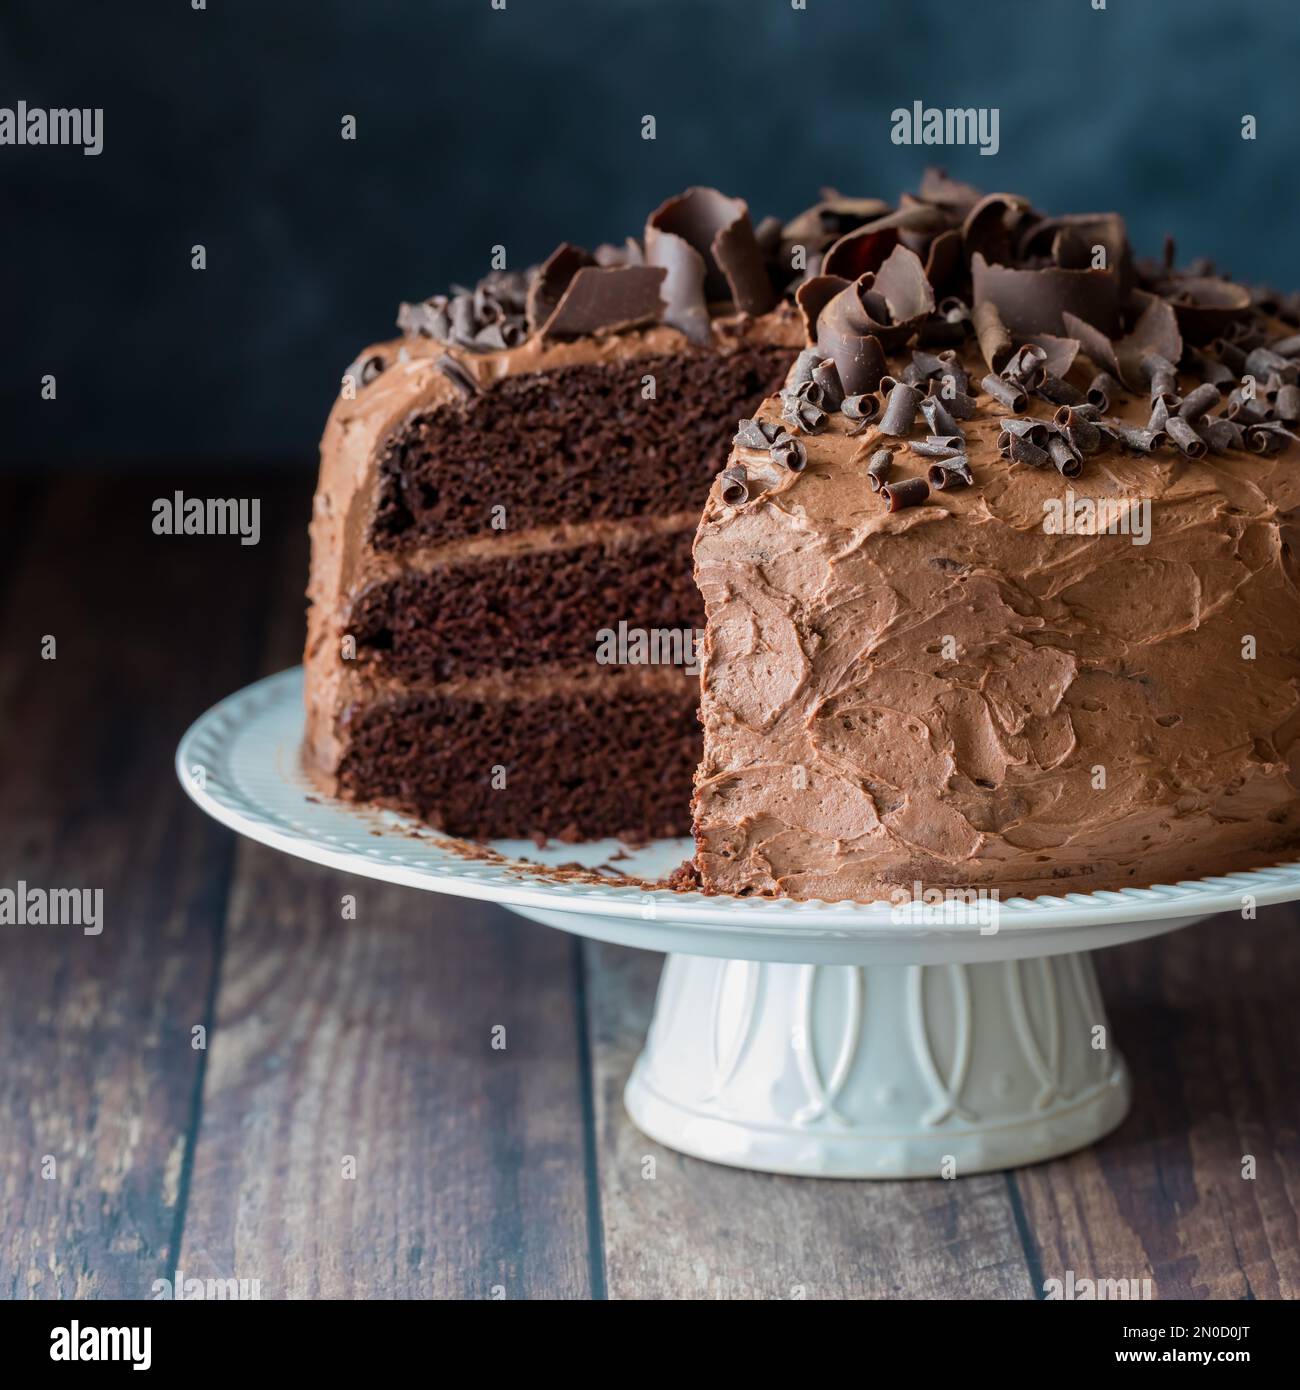 A triple layered moist chocolate cake with frosting and chocolate curls. Stock Photo